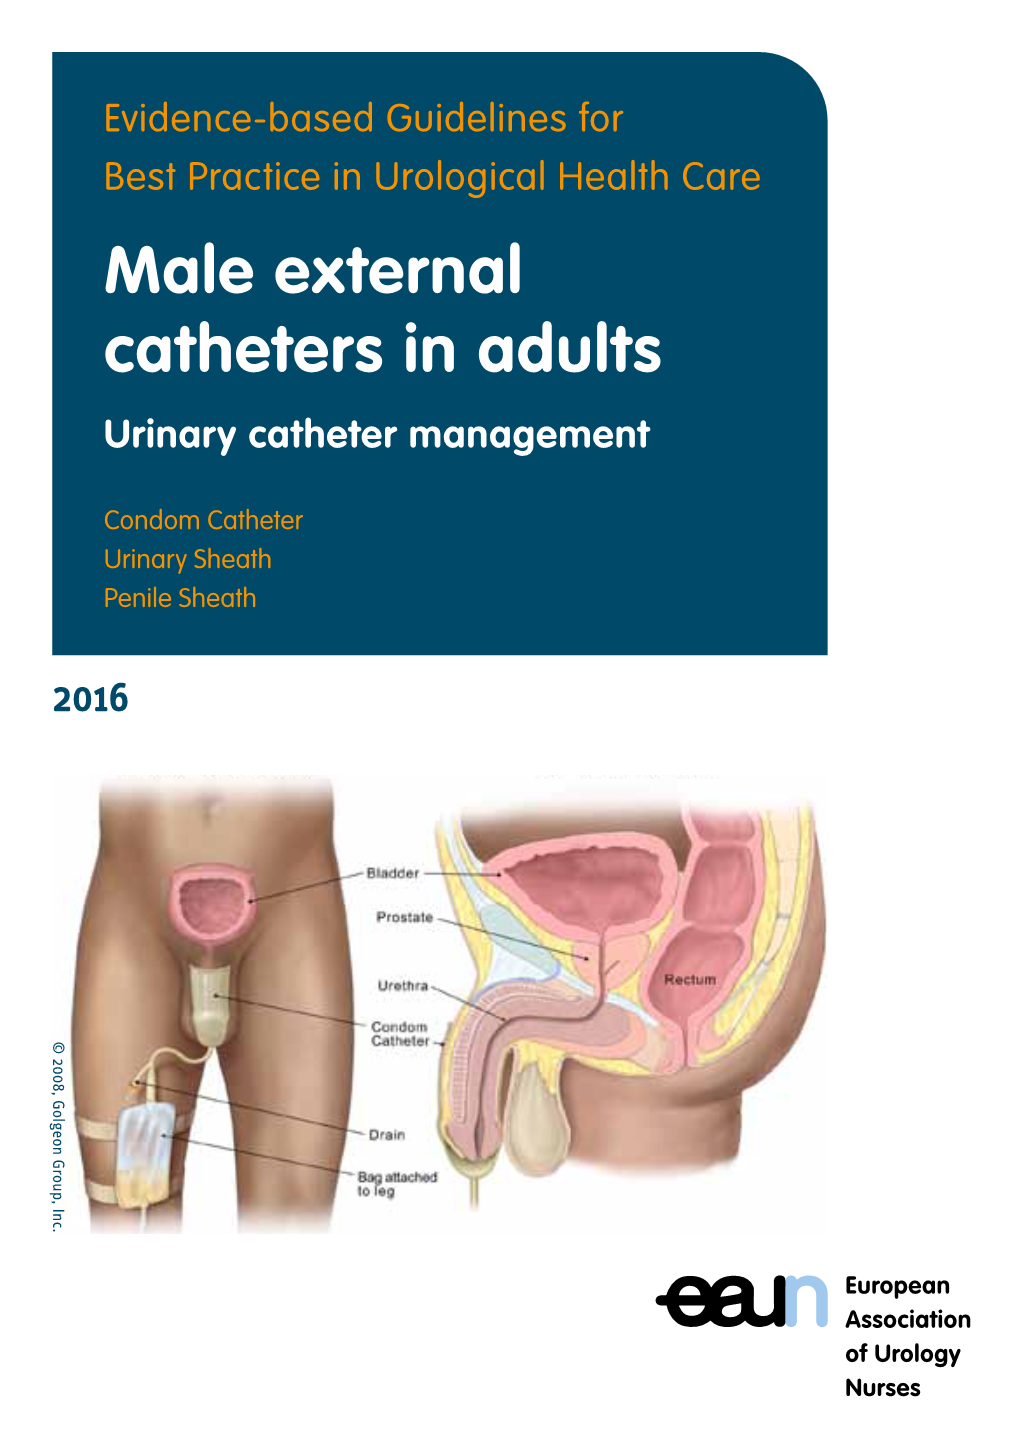 Male External Catheters in Adults Urinary Catheter Management